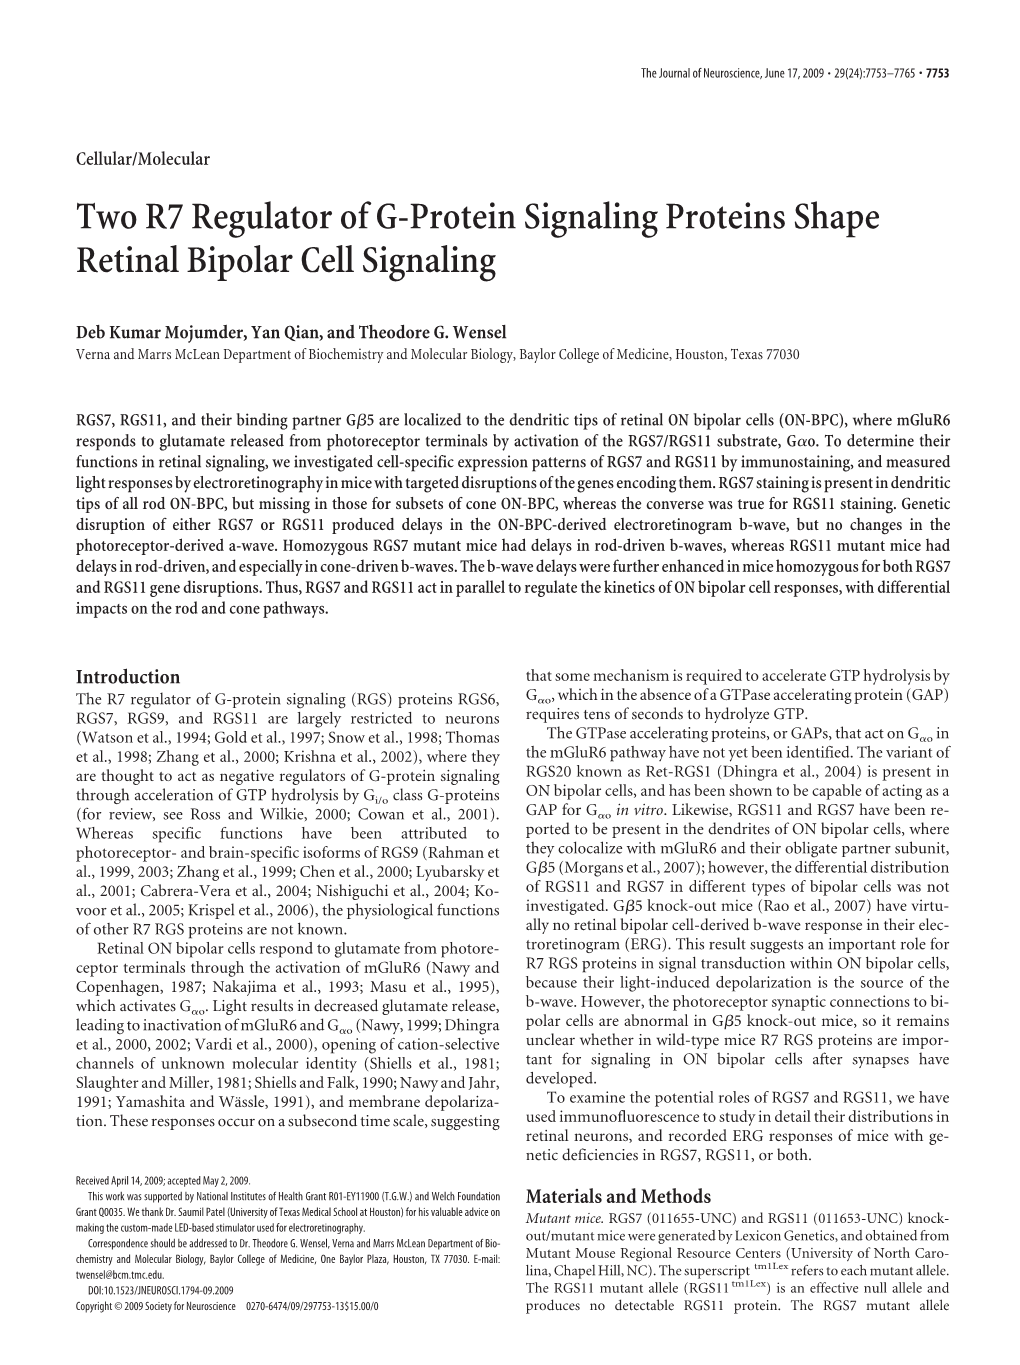 Two R7 Regulator of G-Protein Signaling Proteins Shape Retinal Bipolar Cell Signaling